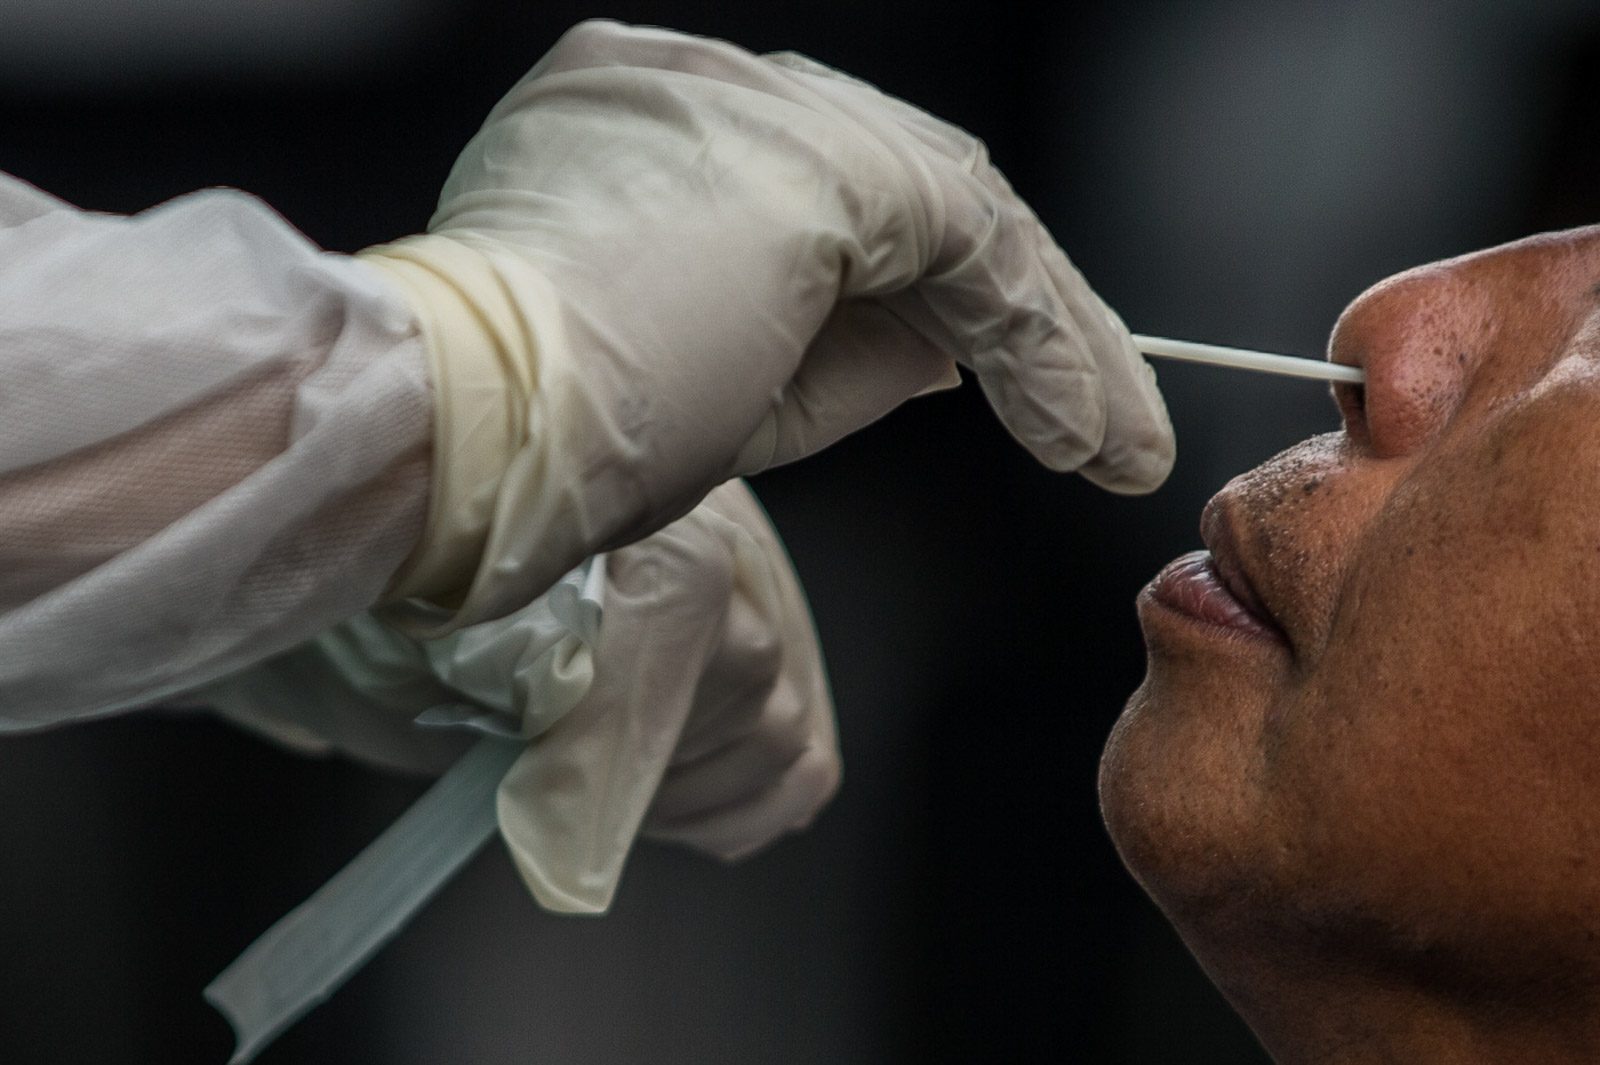 TEST. A health worker conducts a swab test to a suspected COVID-19 patient in the Sta. Ana Hospital in Manila on April 17, 2020. Photo by Lisa Marie David/Rappler 